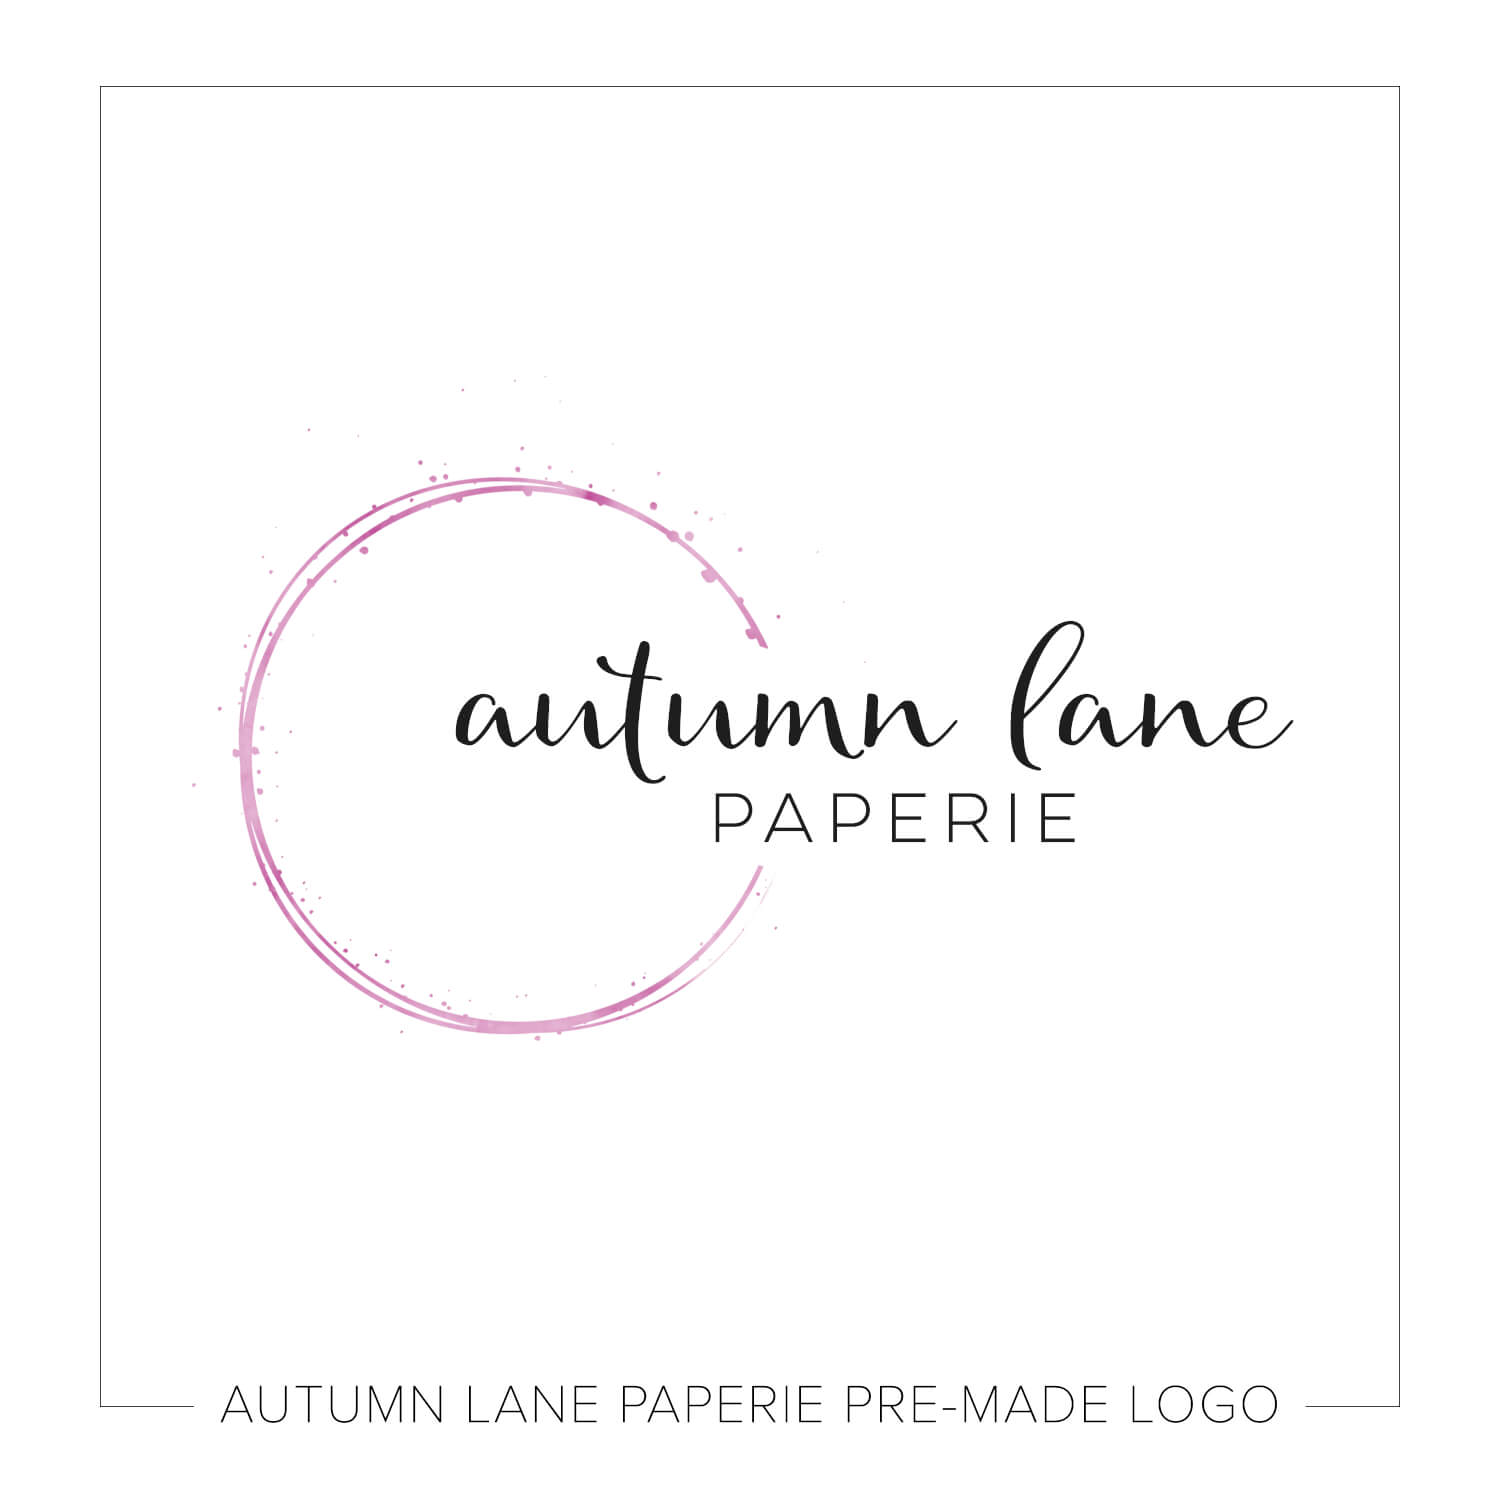 Semicircle with Black and White Logo - Purple Foil Splattered Semicircle Logo J67. Autumn Lane Paperie